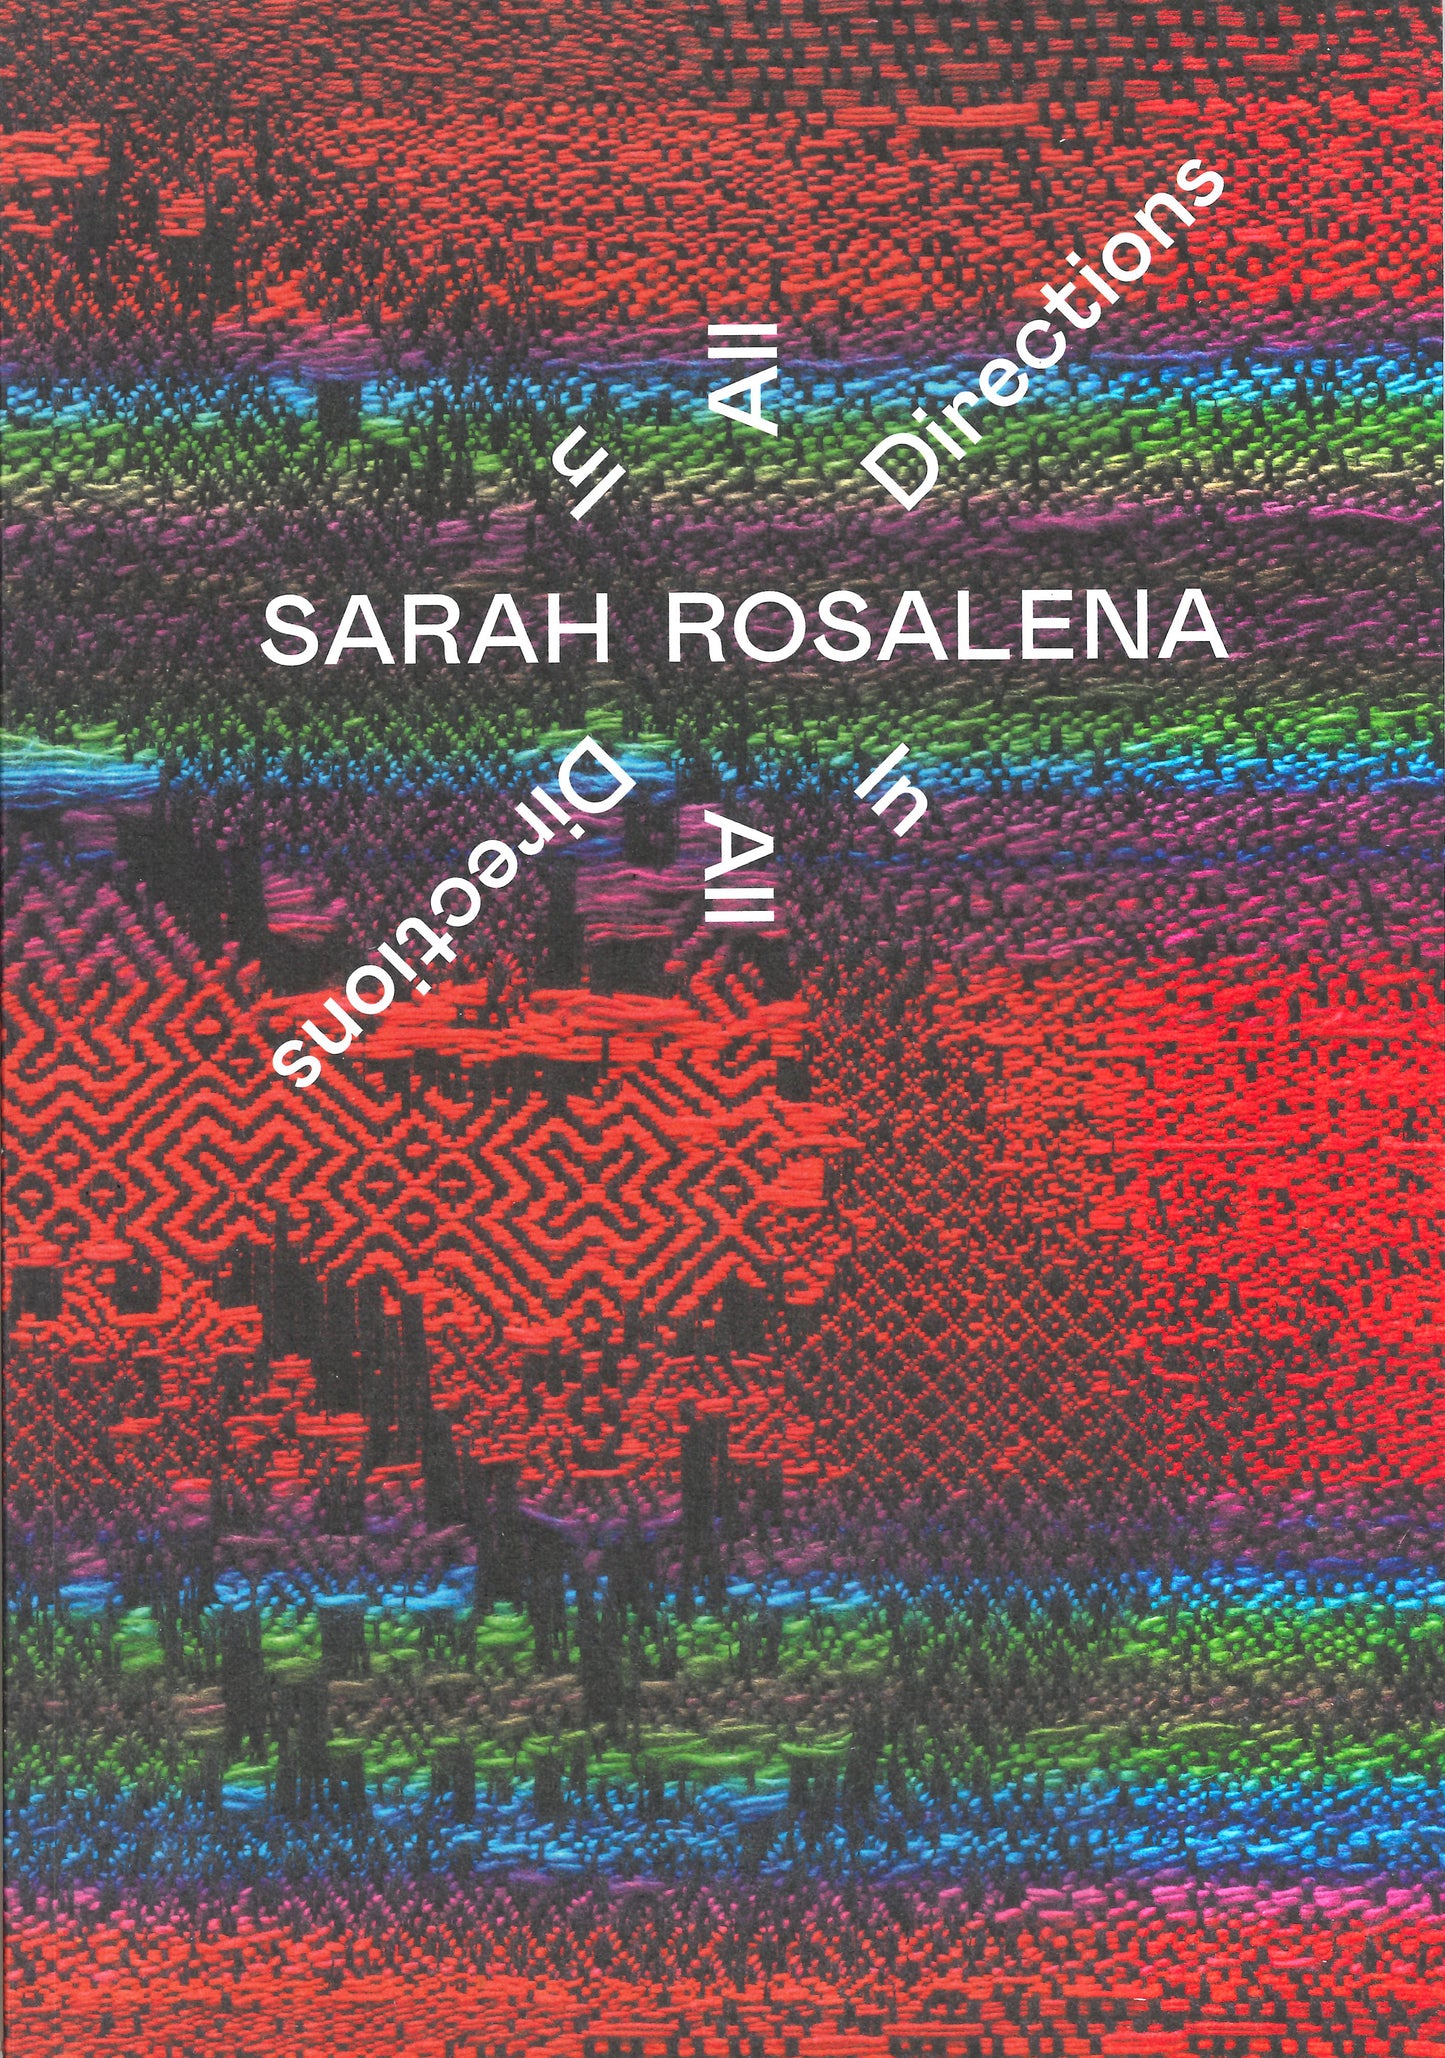 Sarah Rosalena: In All Directions - Exhibition Catalog